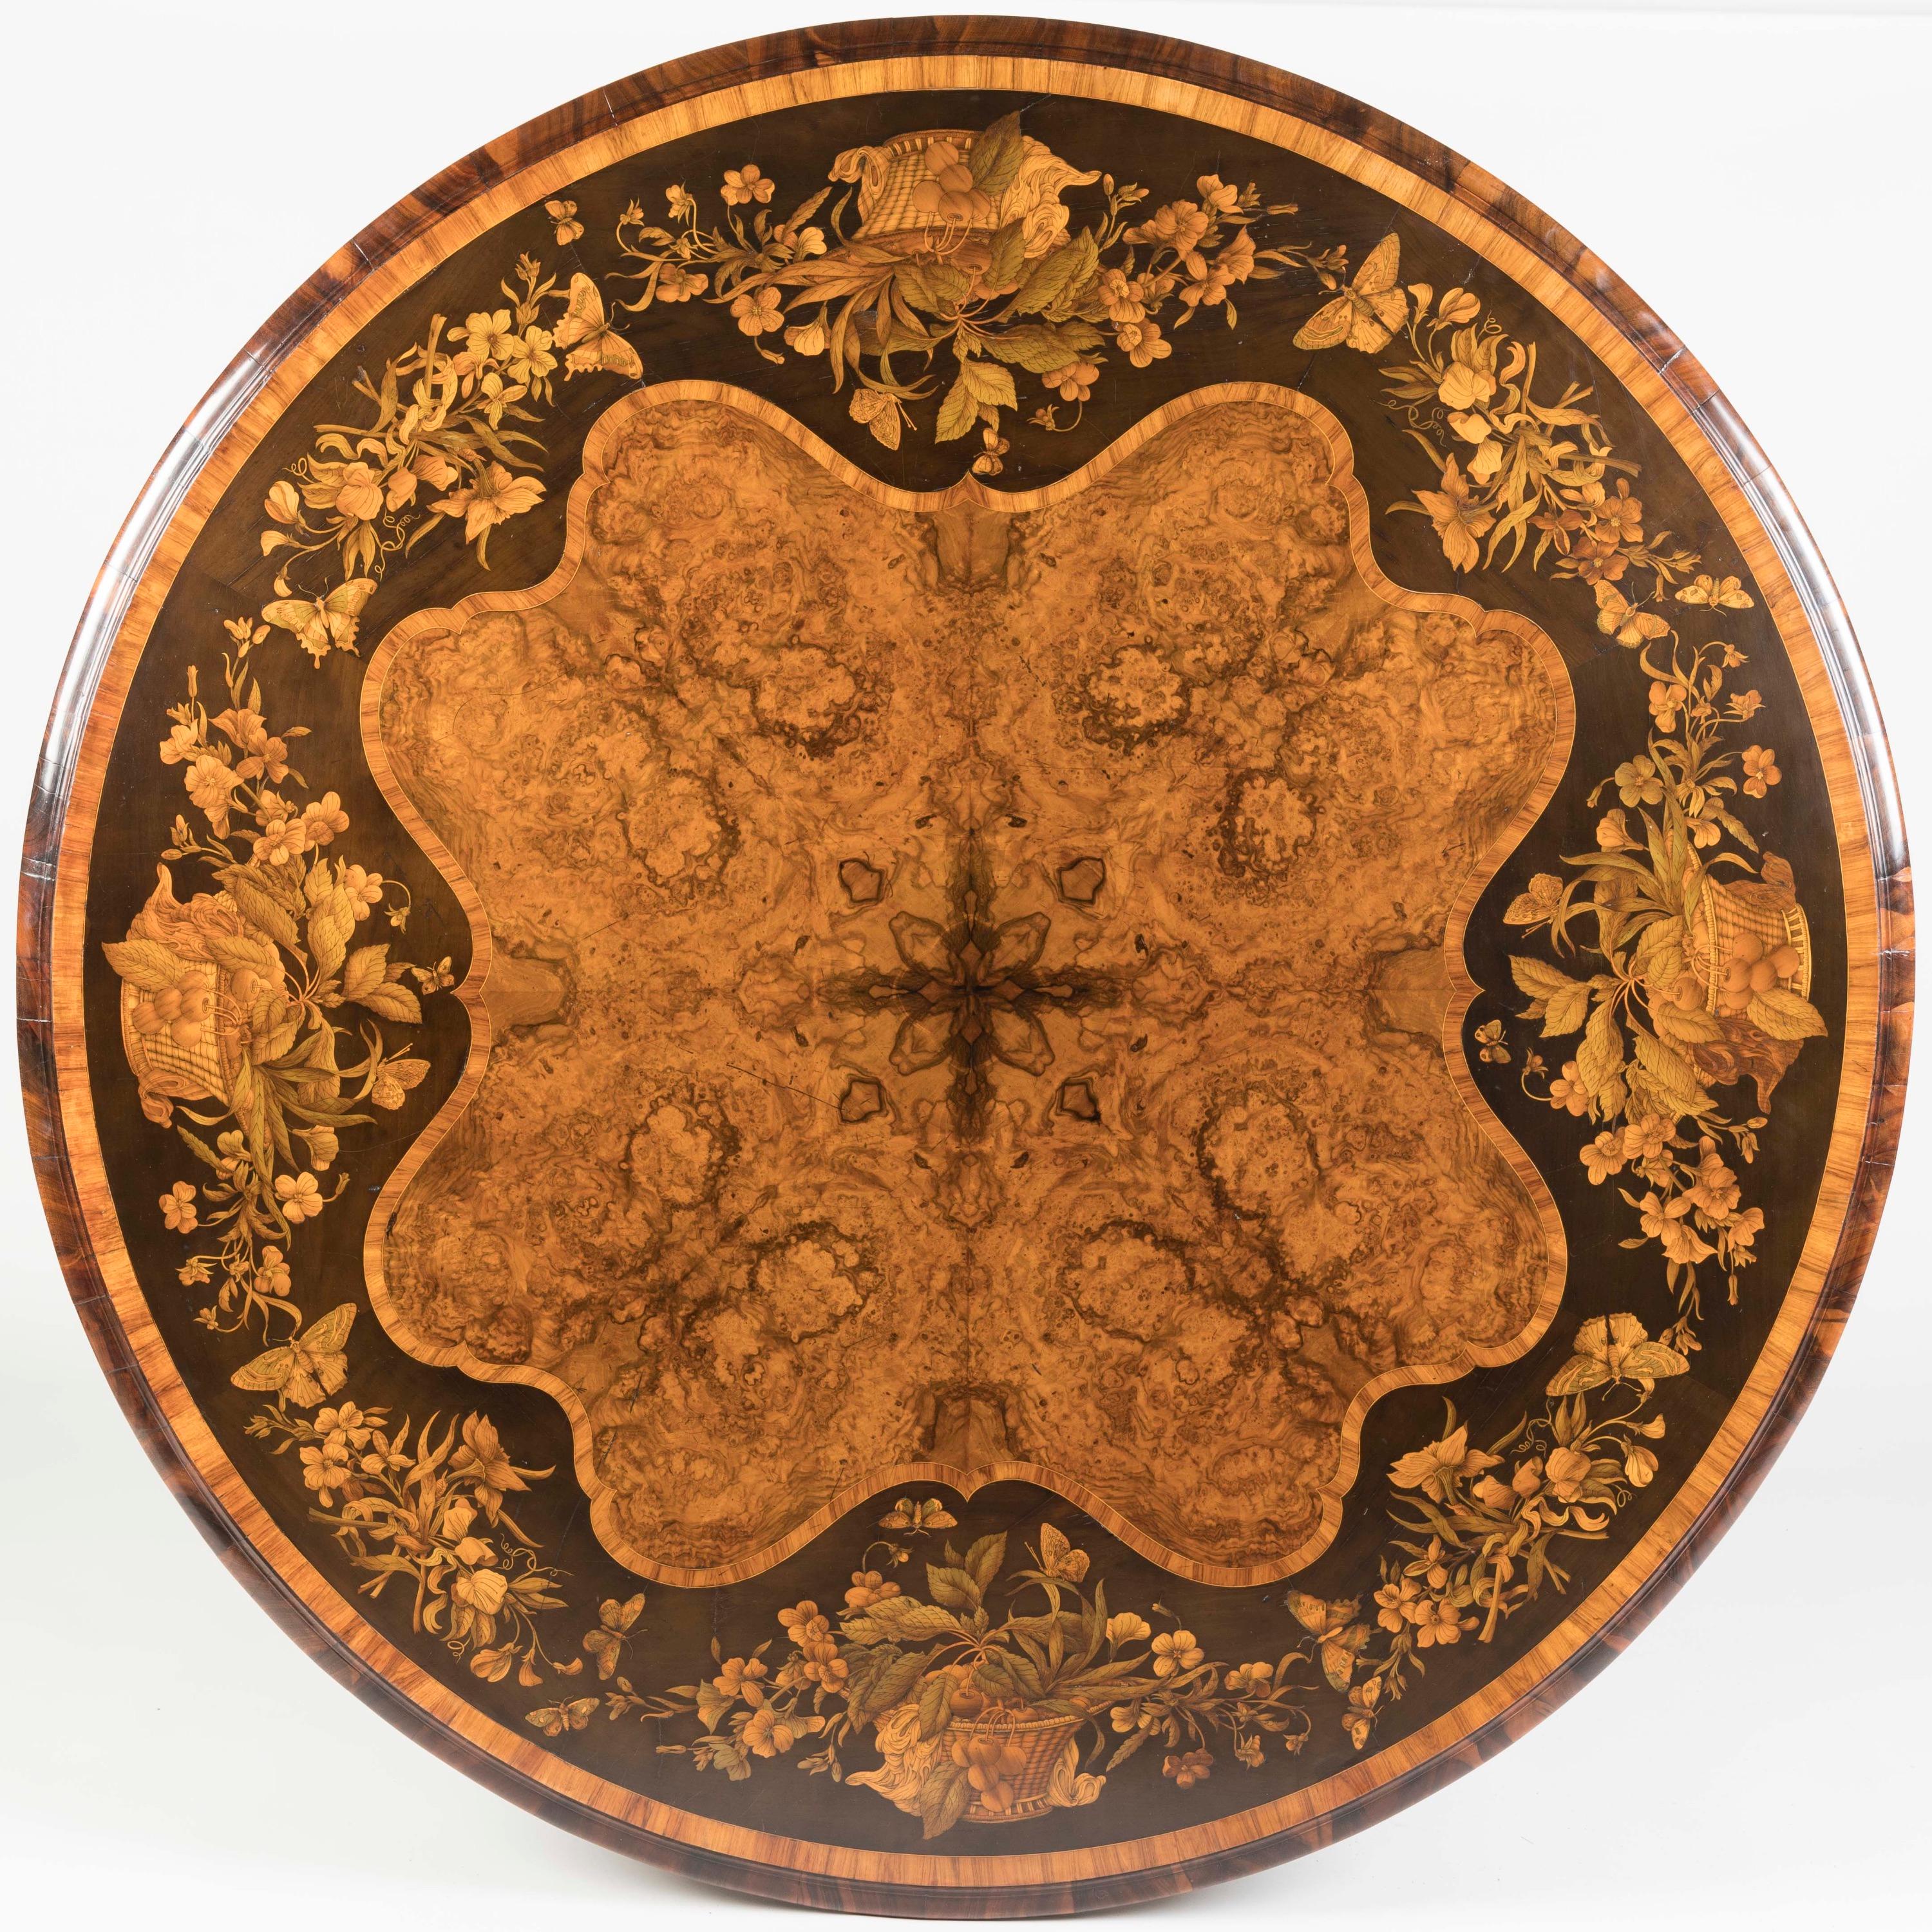 An Exhibition-Quality Burr Walnut and Marquetry Centre Table
Designed by Richard Bridgens (1785-1846)

The circular top characterised by a central quarter-veneered field of beautifully figured burr walnut, surrounded by a wide shaped border of